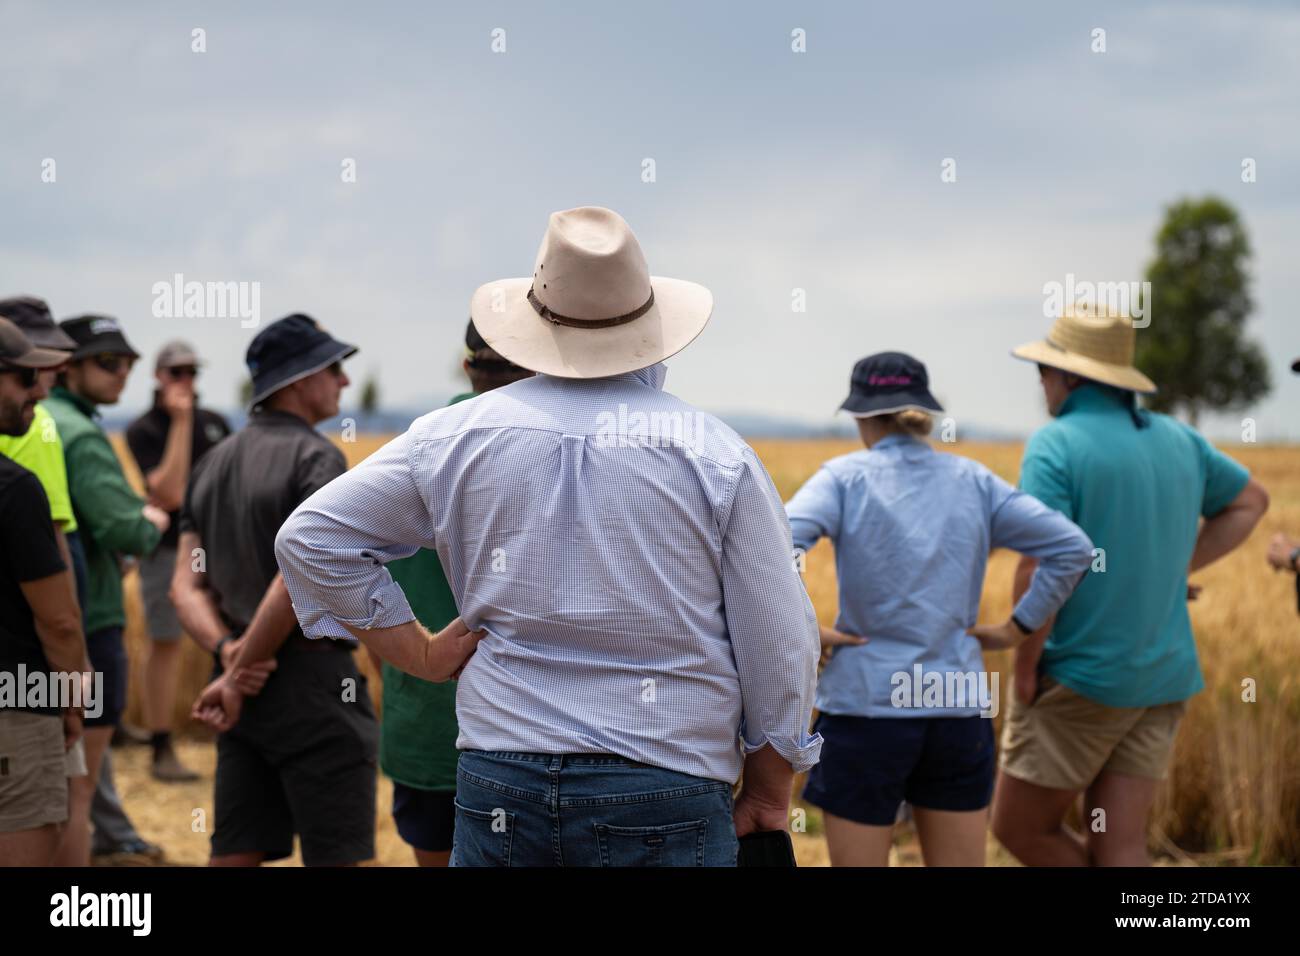 agricultural students in a field learning about crop farming Stock Photo